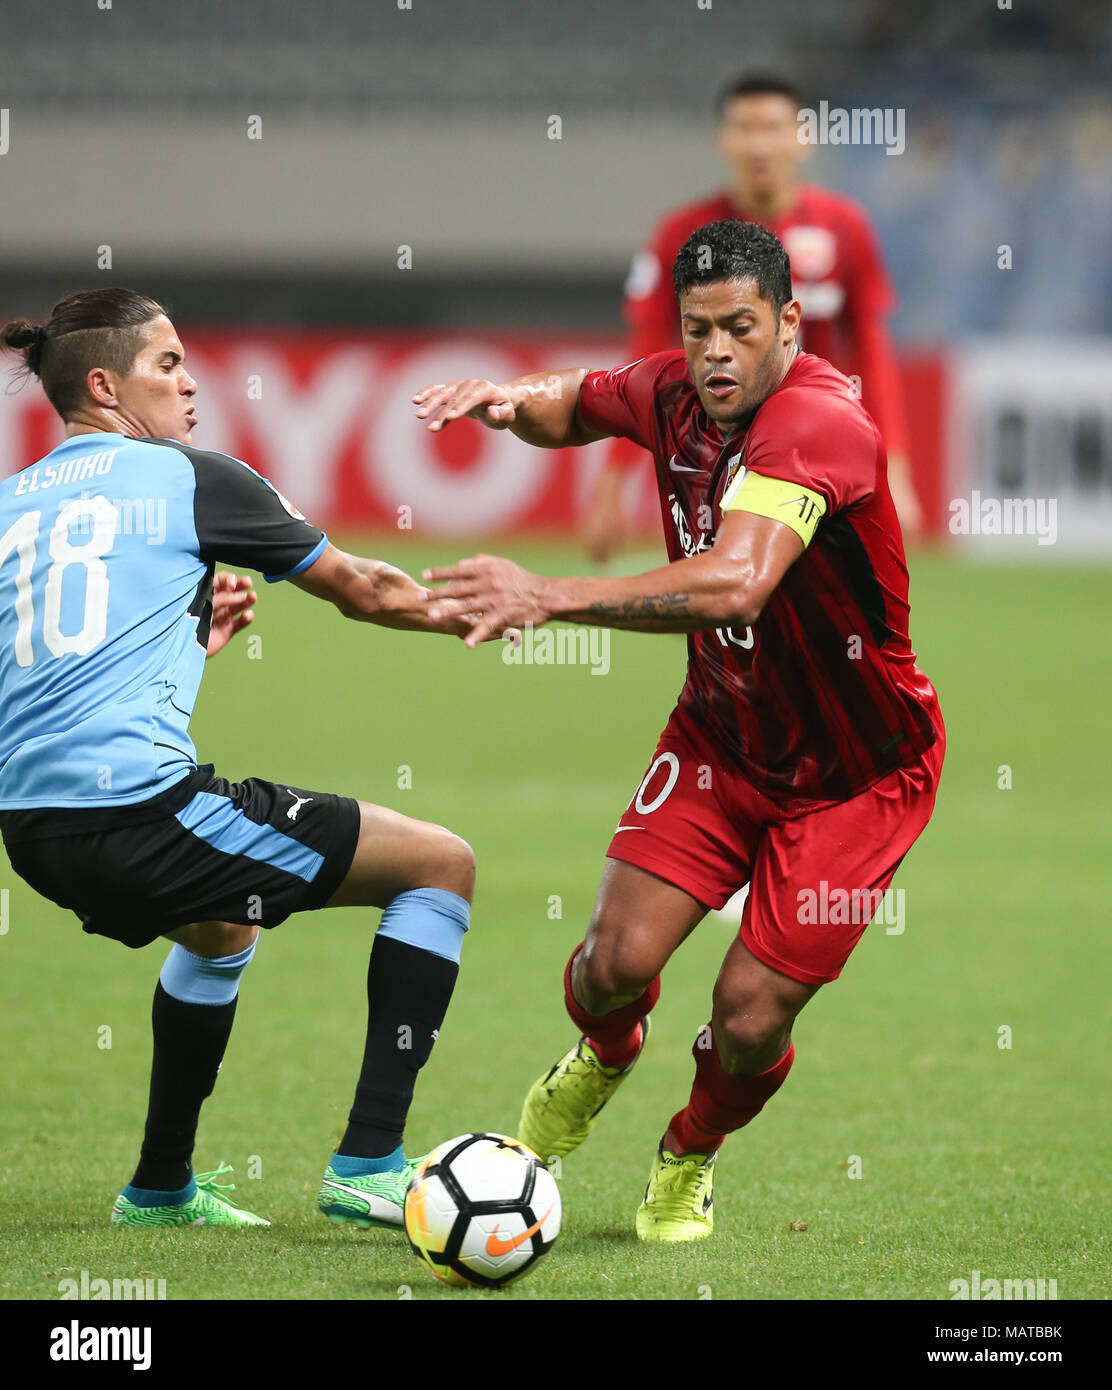 Shanghai, China. 4th Apr, 2018. Hulk (R) of Shanghai SIPG FC competes during the AFC Champions League group F soccer match between China's Shanghai SIPG FC and Japan's Kawasaki Frontale in Shanghai, east China, April 4, 2018. The match ended in a 1-1 draw. Credit: Ding Ting/Xinhua/Alamy Live News Stock Photo